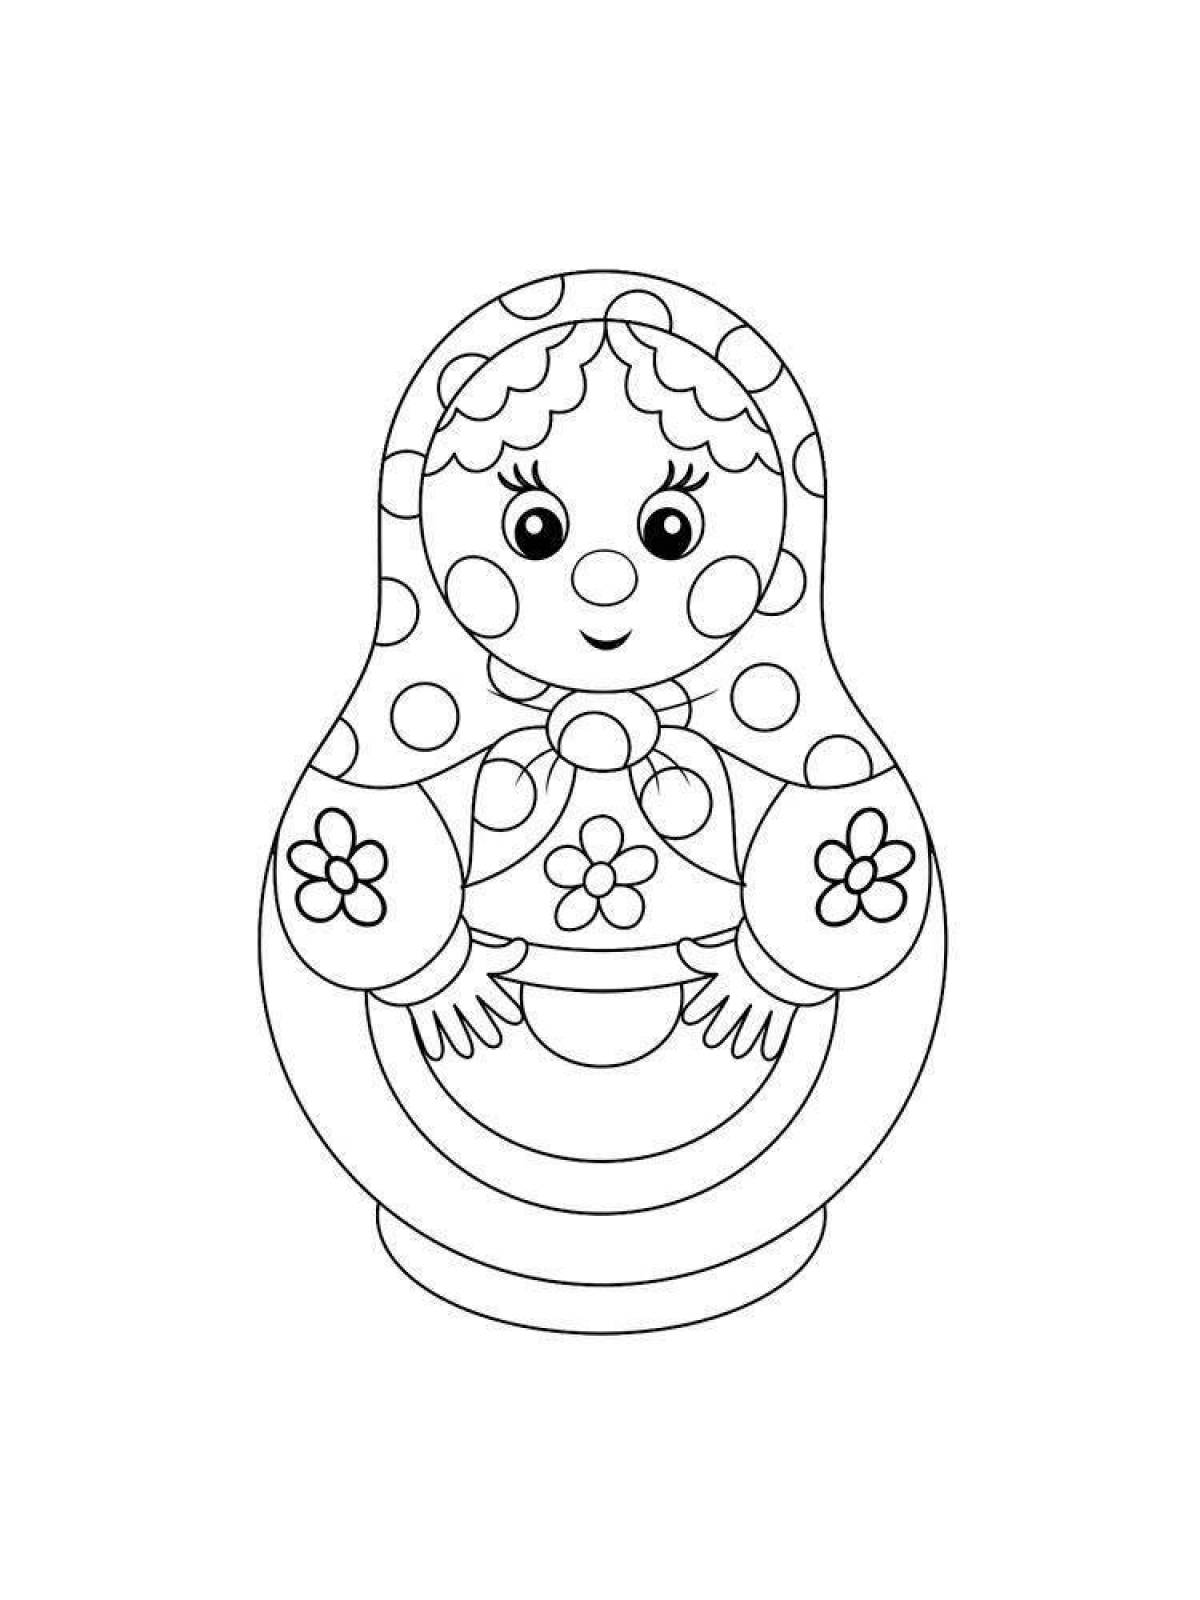 Magic matryoshka coloring book for children 4-5 years old